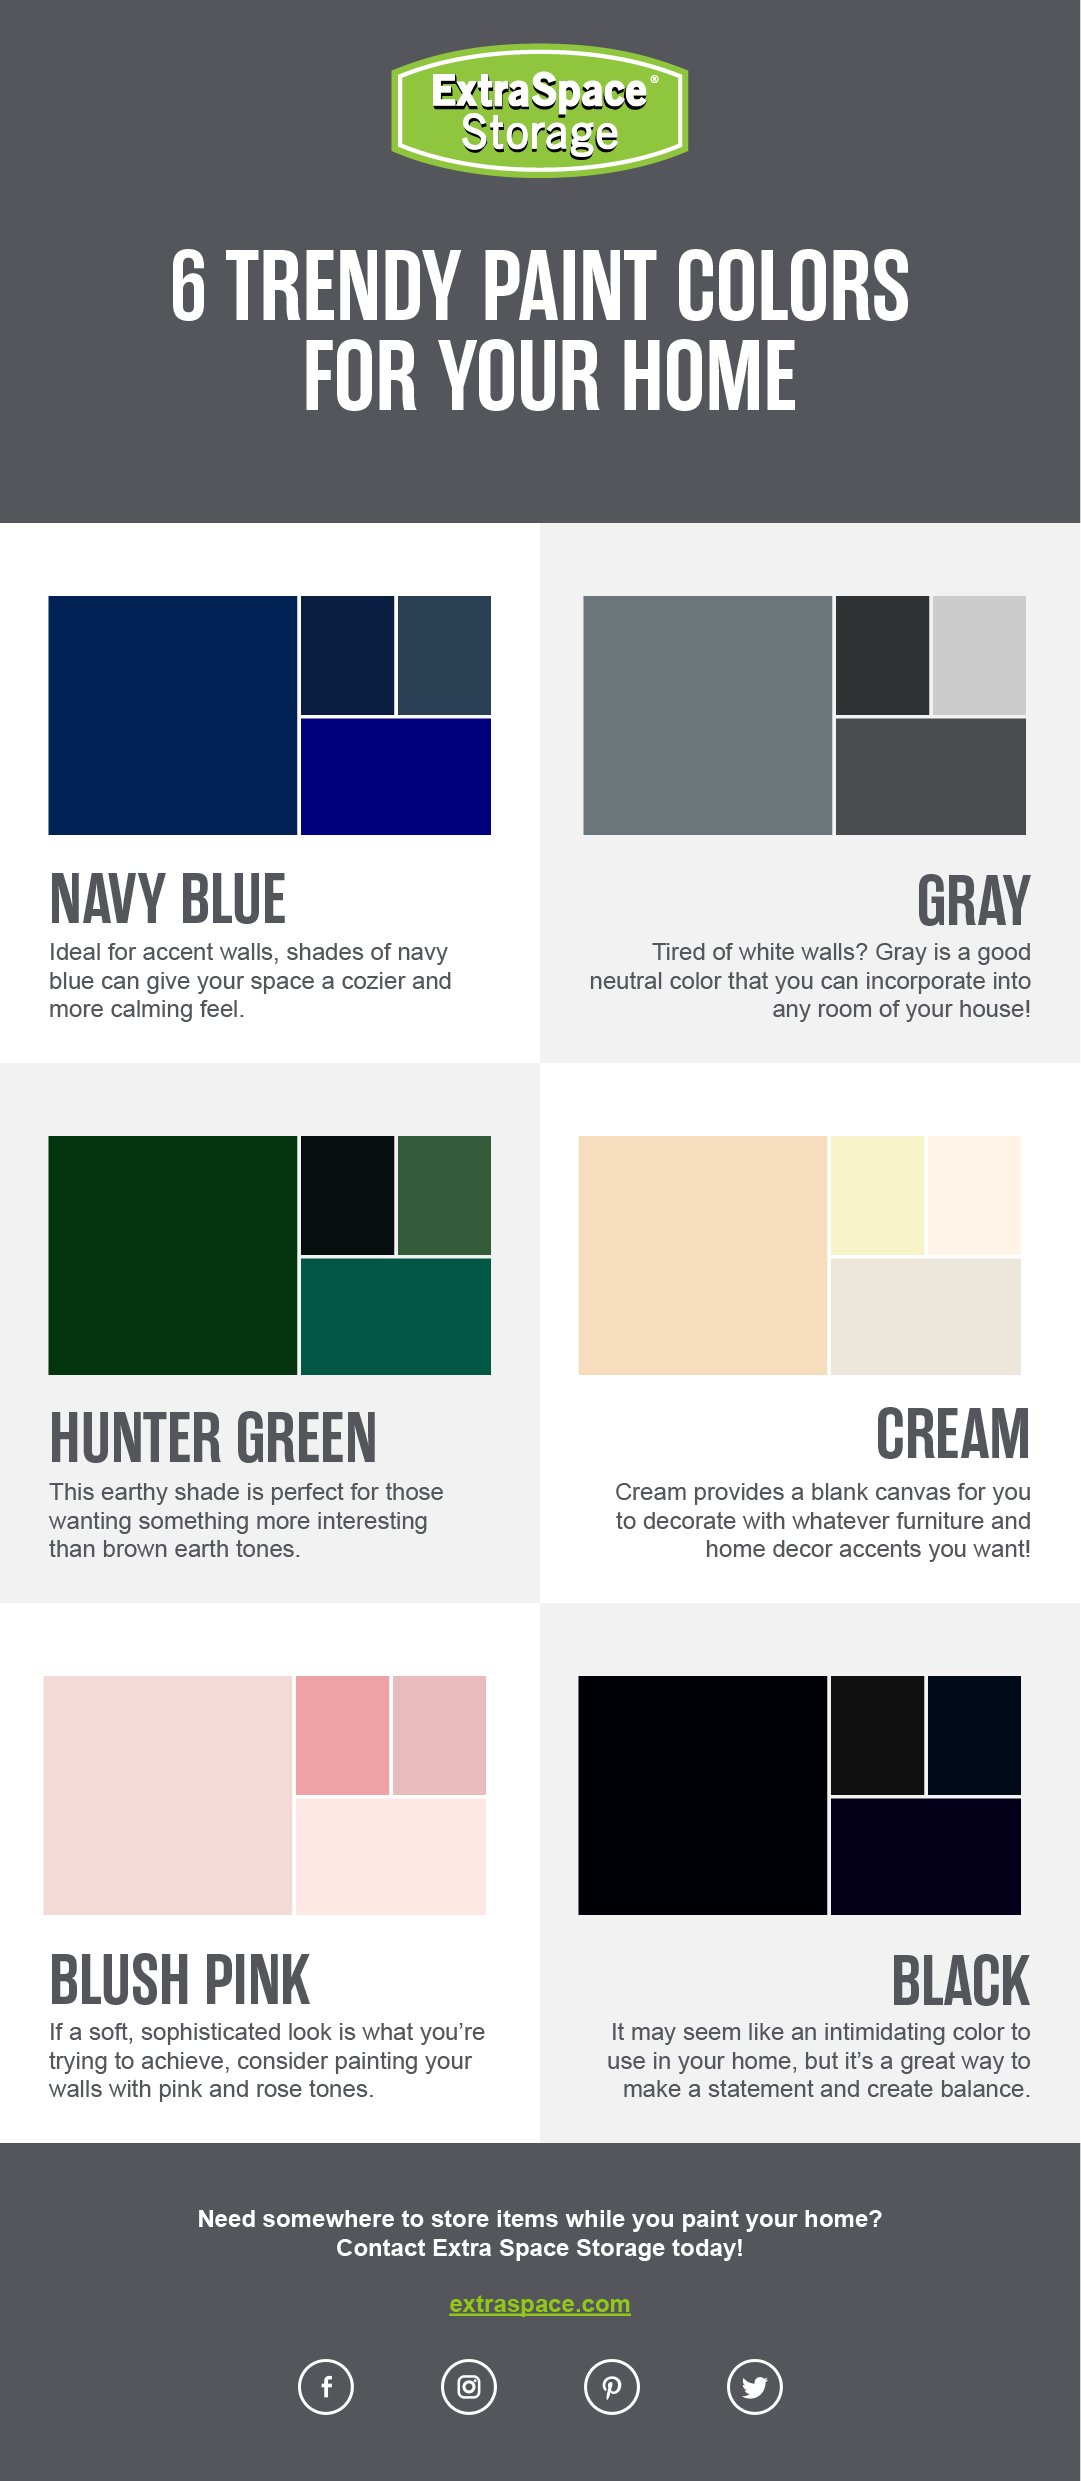 6 Trendy Paint Colors for Your Home (Infographic)